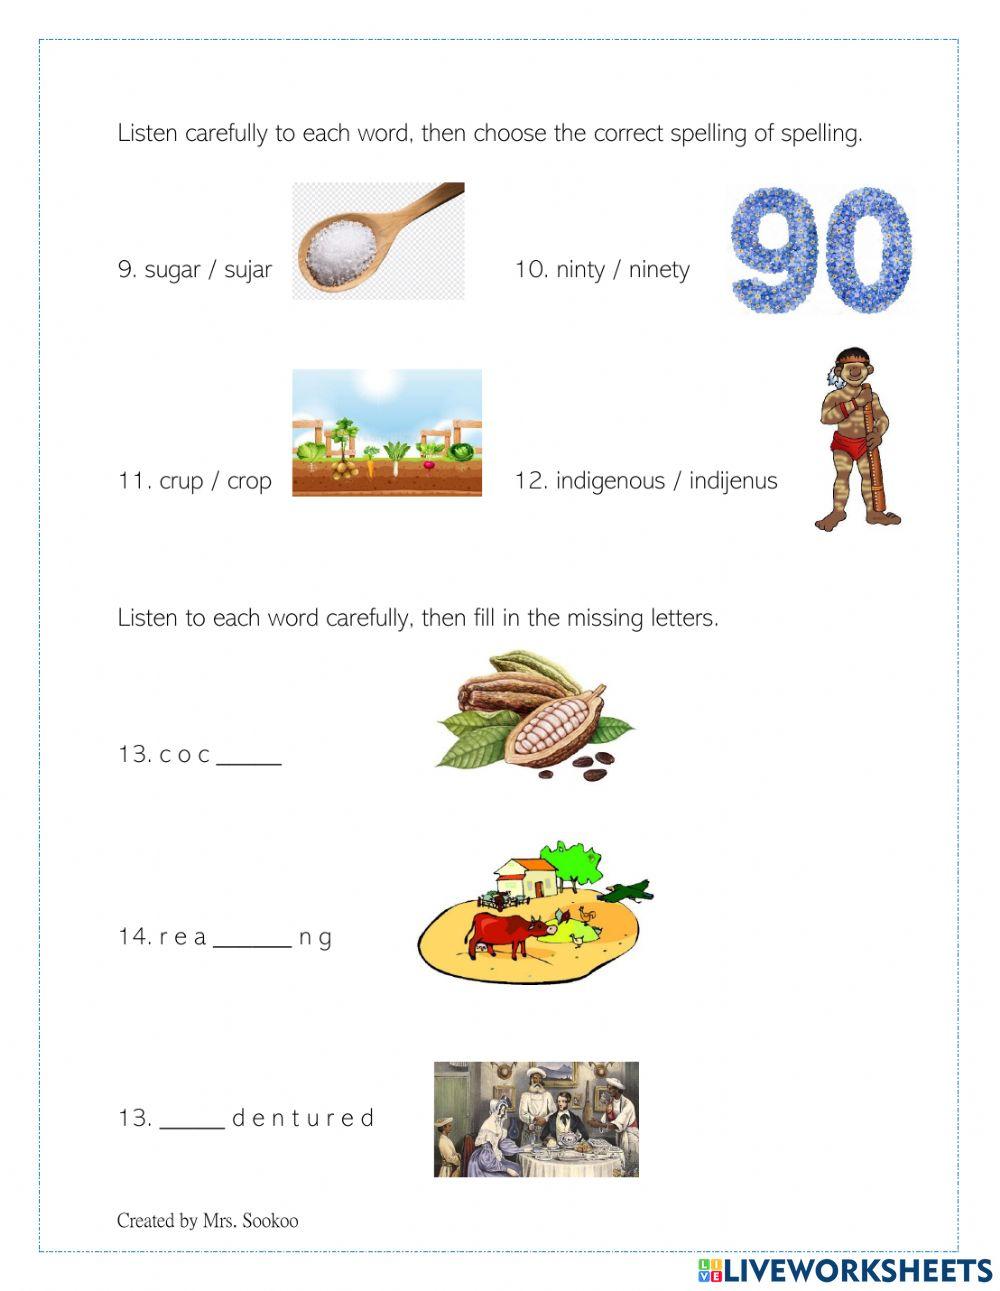 Weekly Test - Spelling 29th Oct